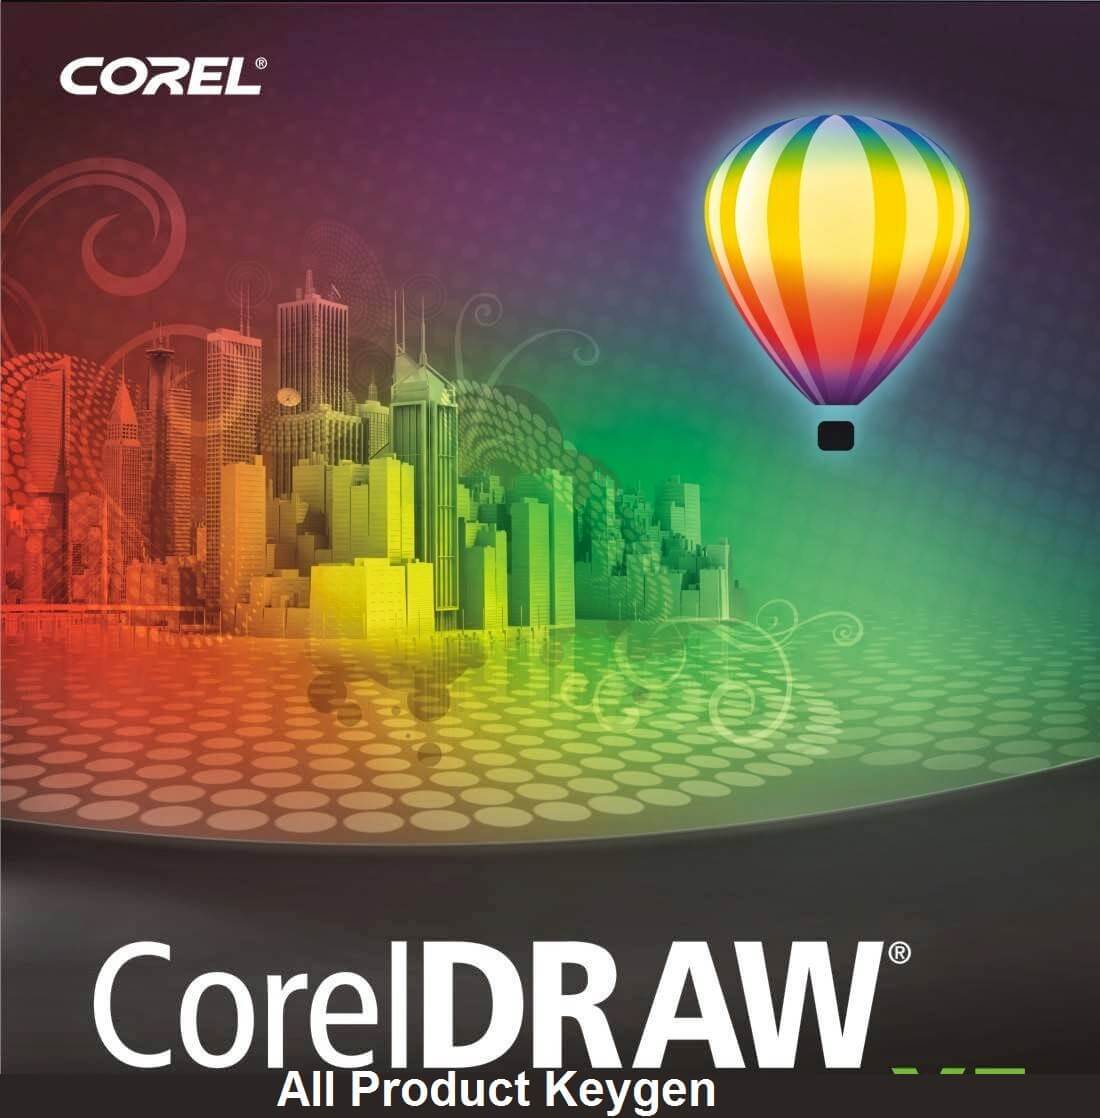 coreldraw x15 full version free download with crack